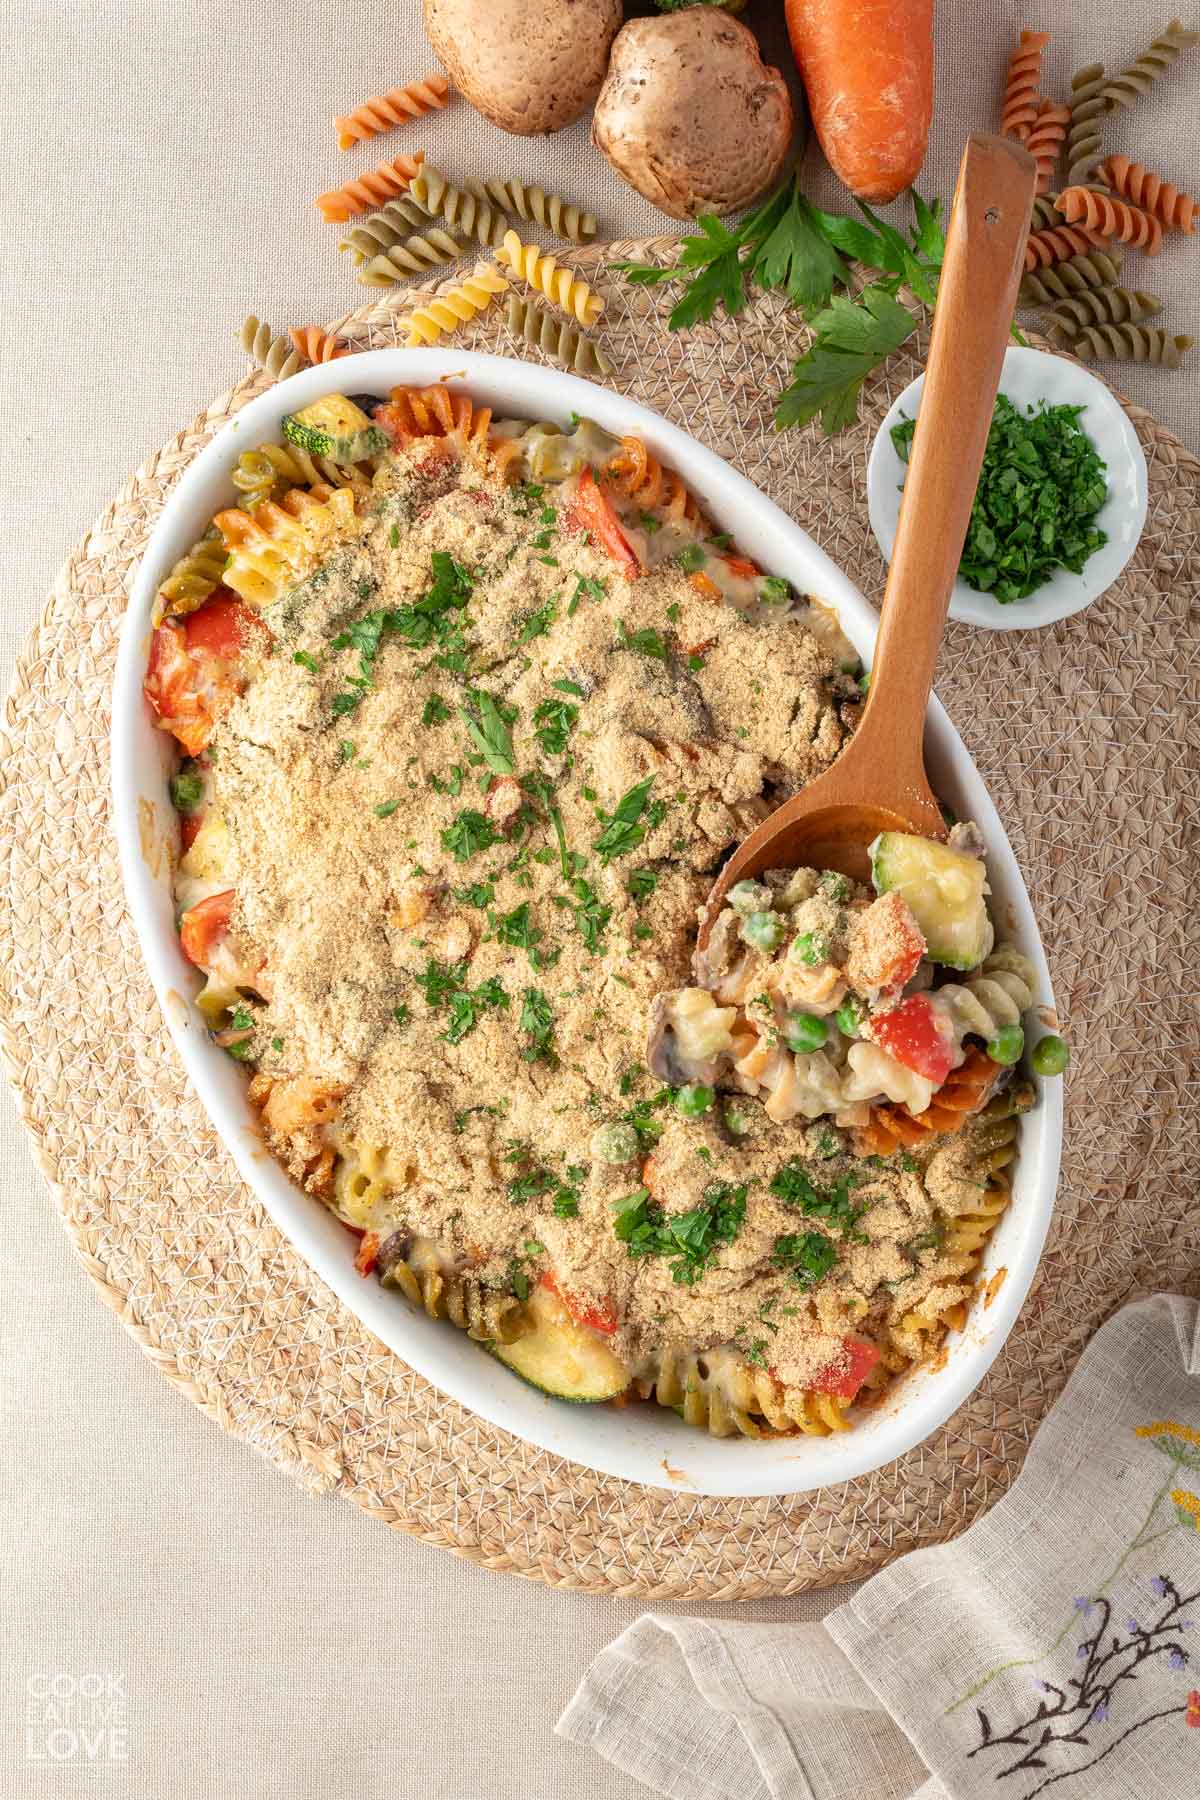 Vegan pasta bake in a casserole dish with a spoon lifting up a serving slightly.